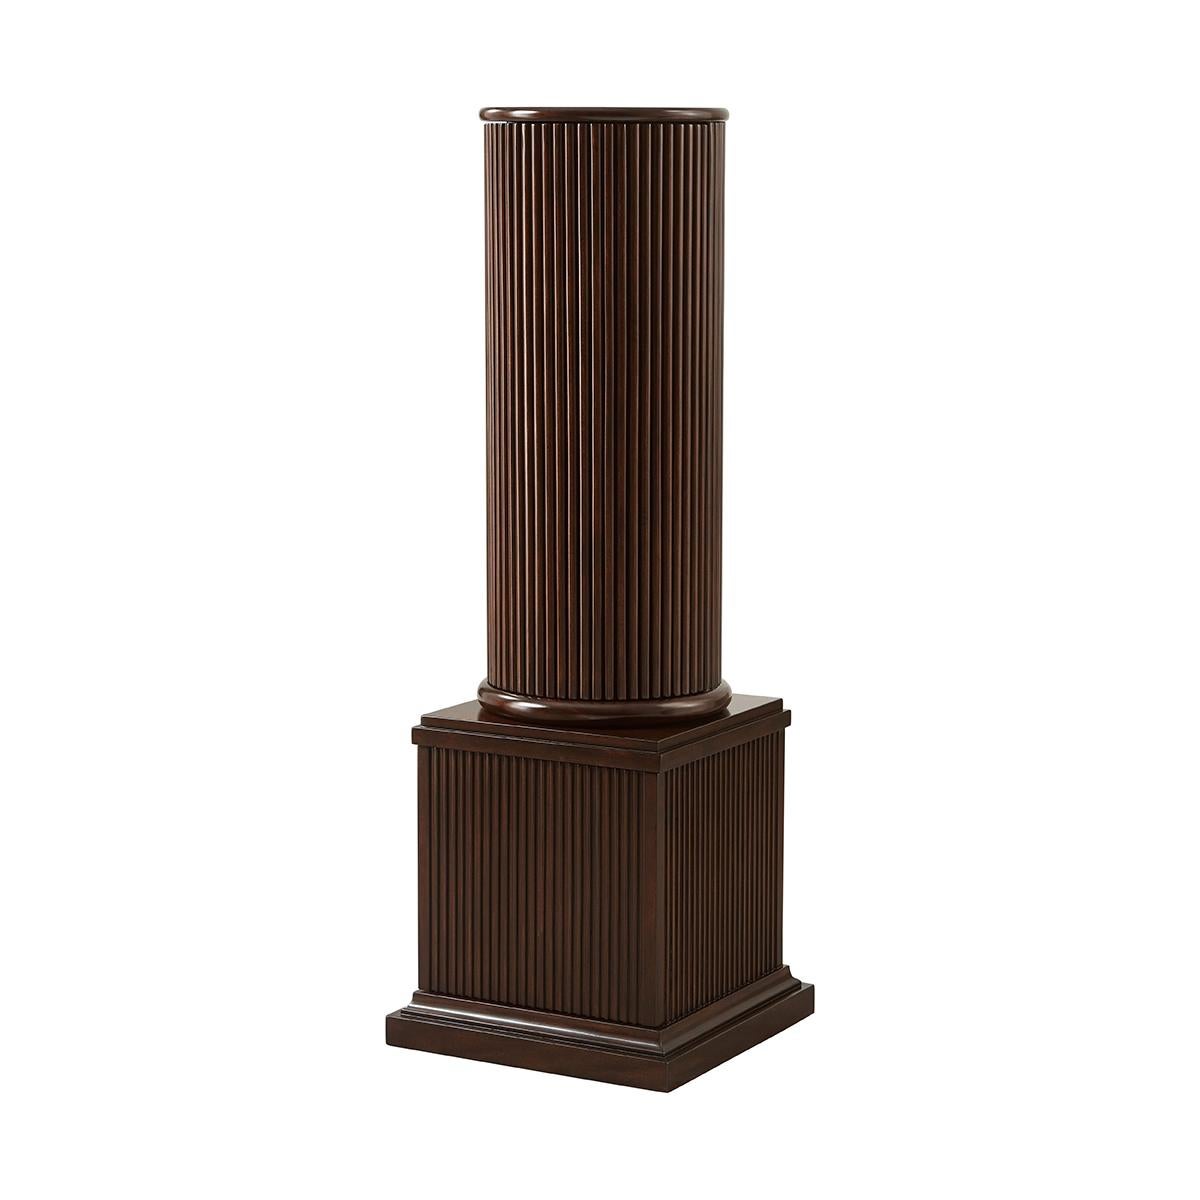 A pair of neoclassic style column-form pedestals with a reeded round top section, enclosing an interior with a single shelf and the lower squared section, fluted and also enclosing an interior with a single shelf. Can also be purchased